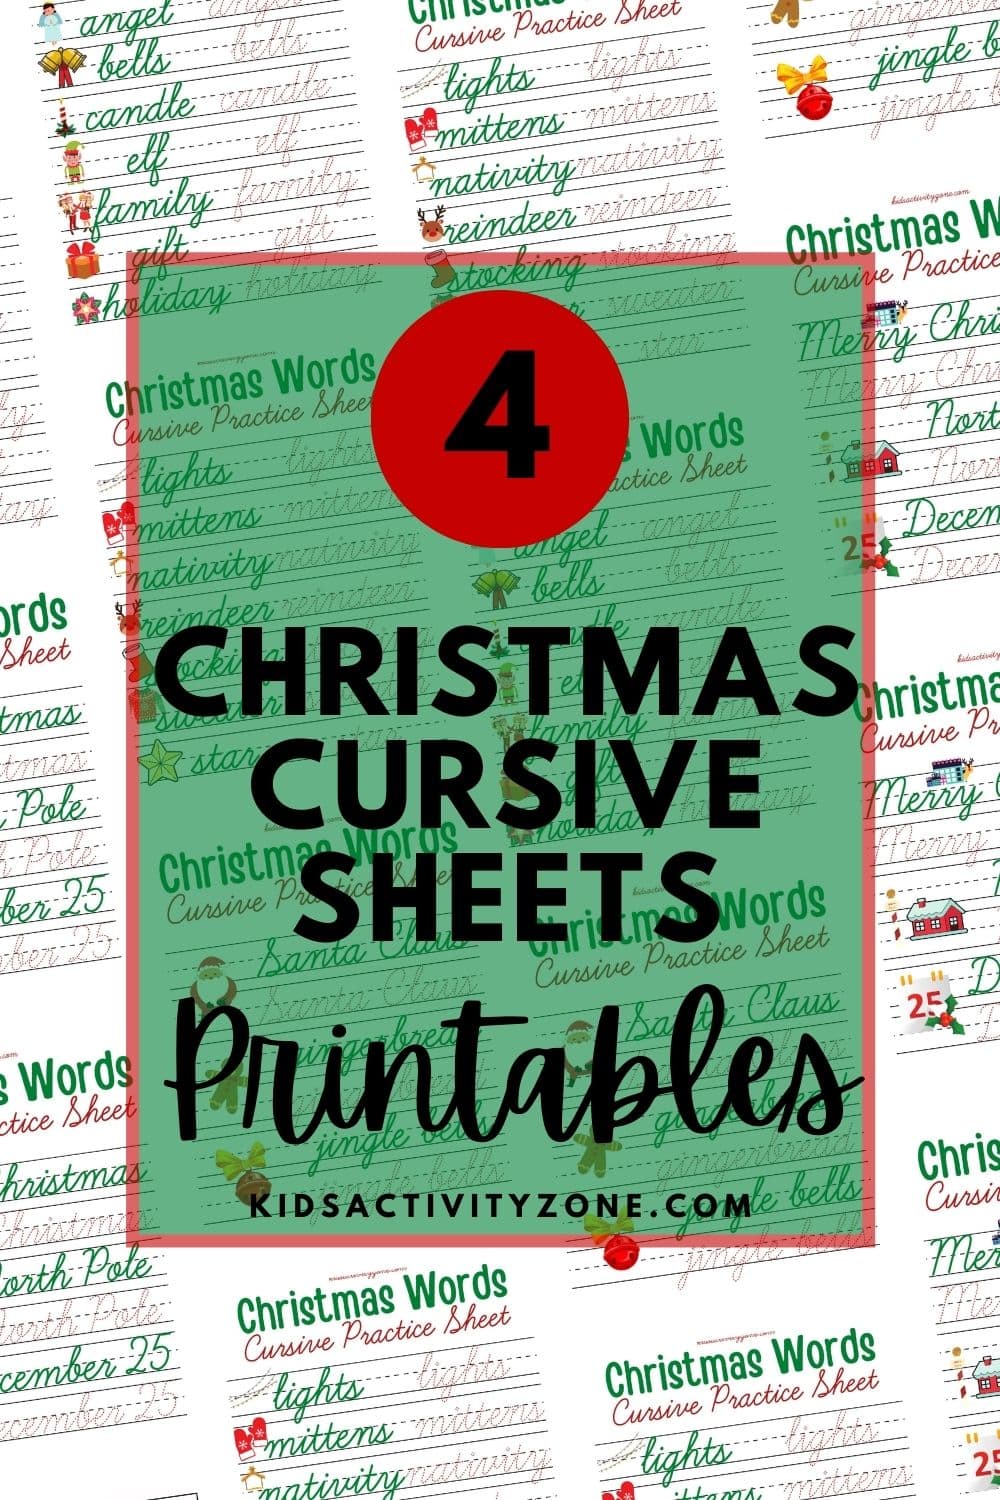 Learn and have fun with these free printable Christmas Words Cursive Practice Sheets. They combine handwriting and spelling practice. 